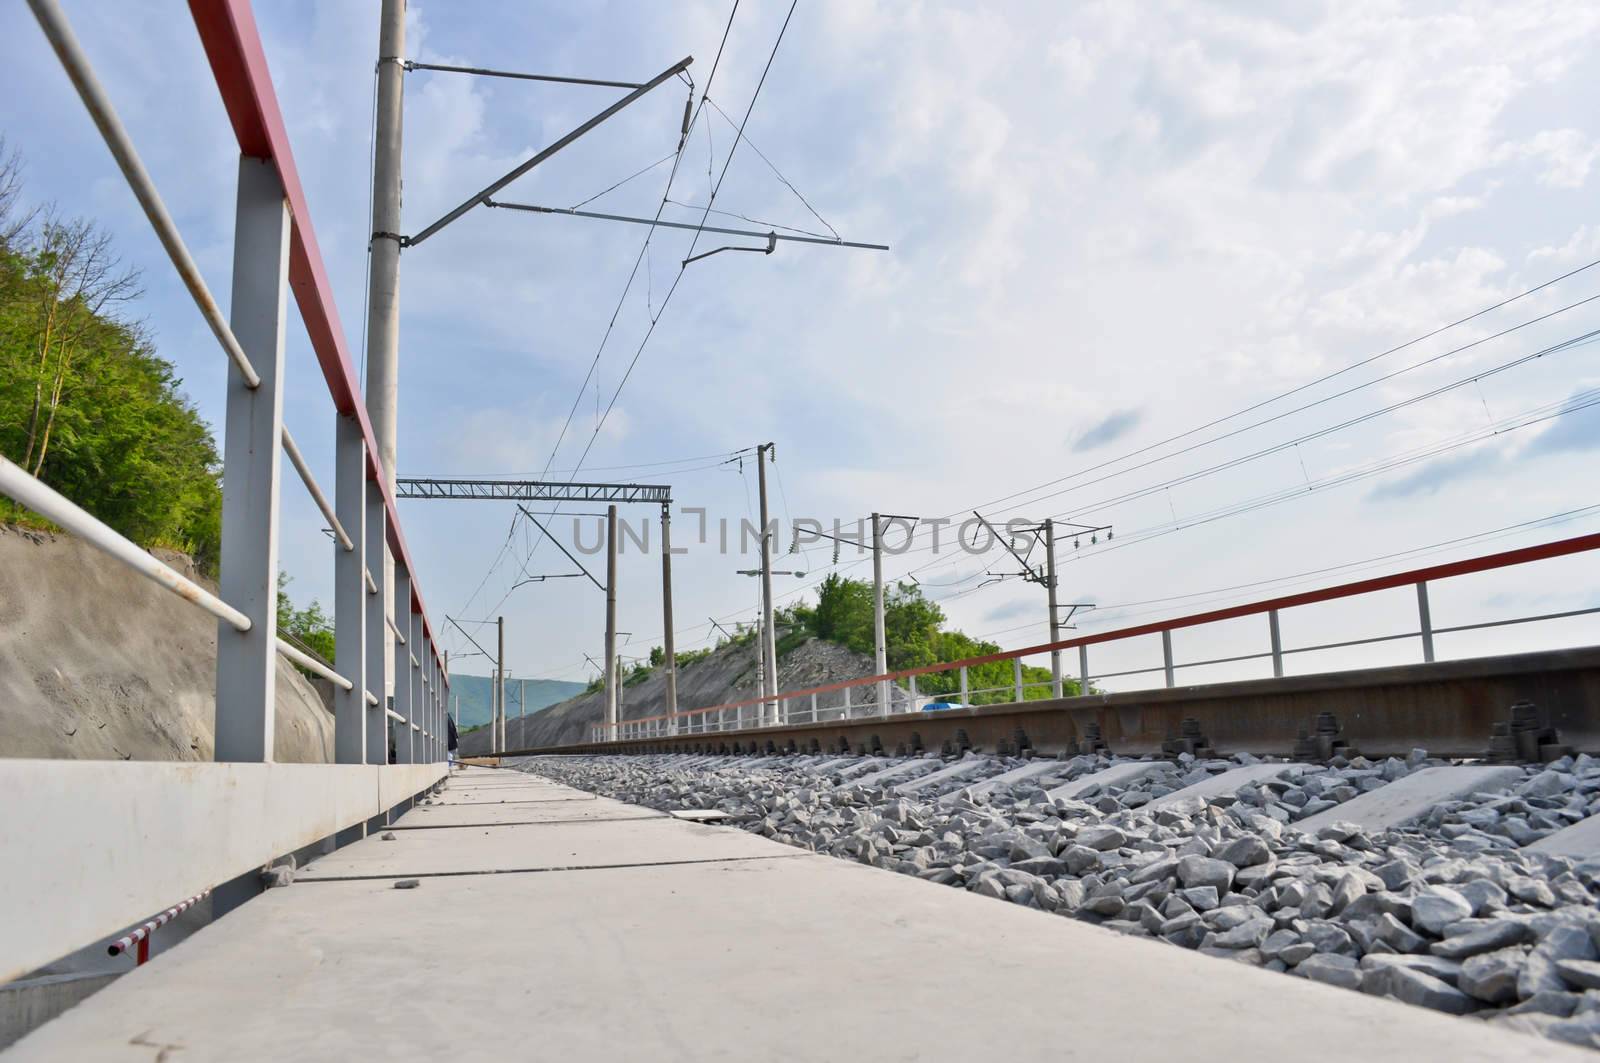 railroad track, embankment, and power poles by vlaru